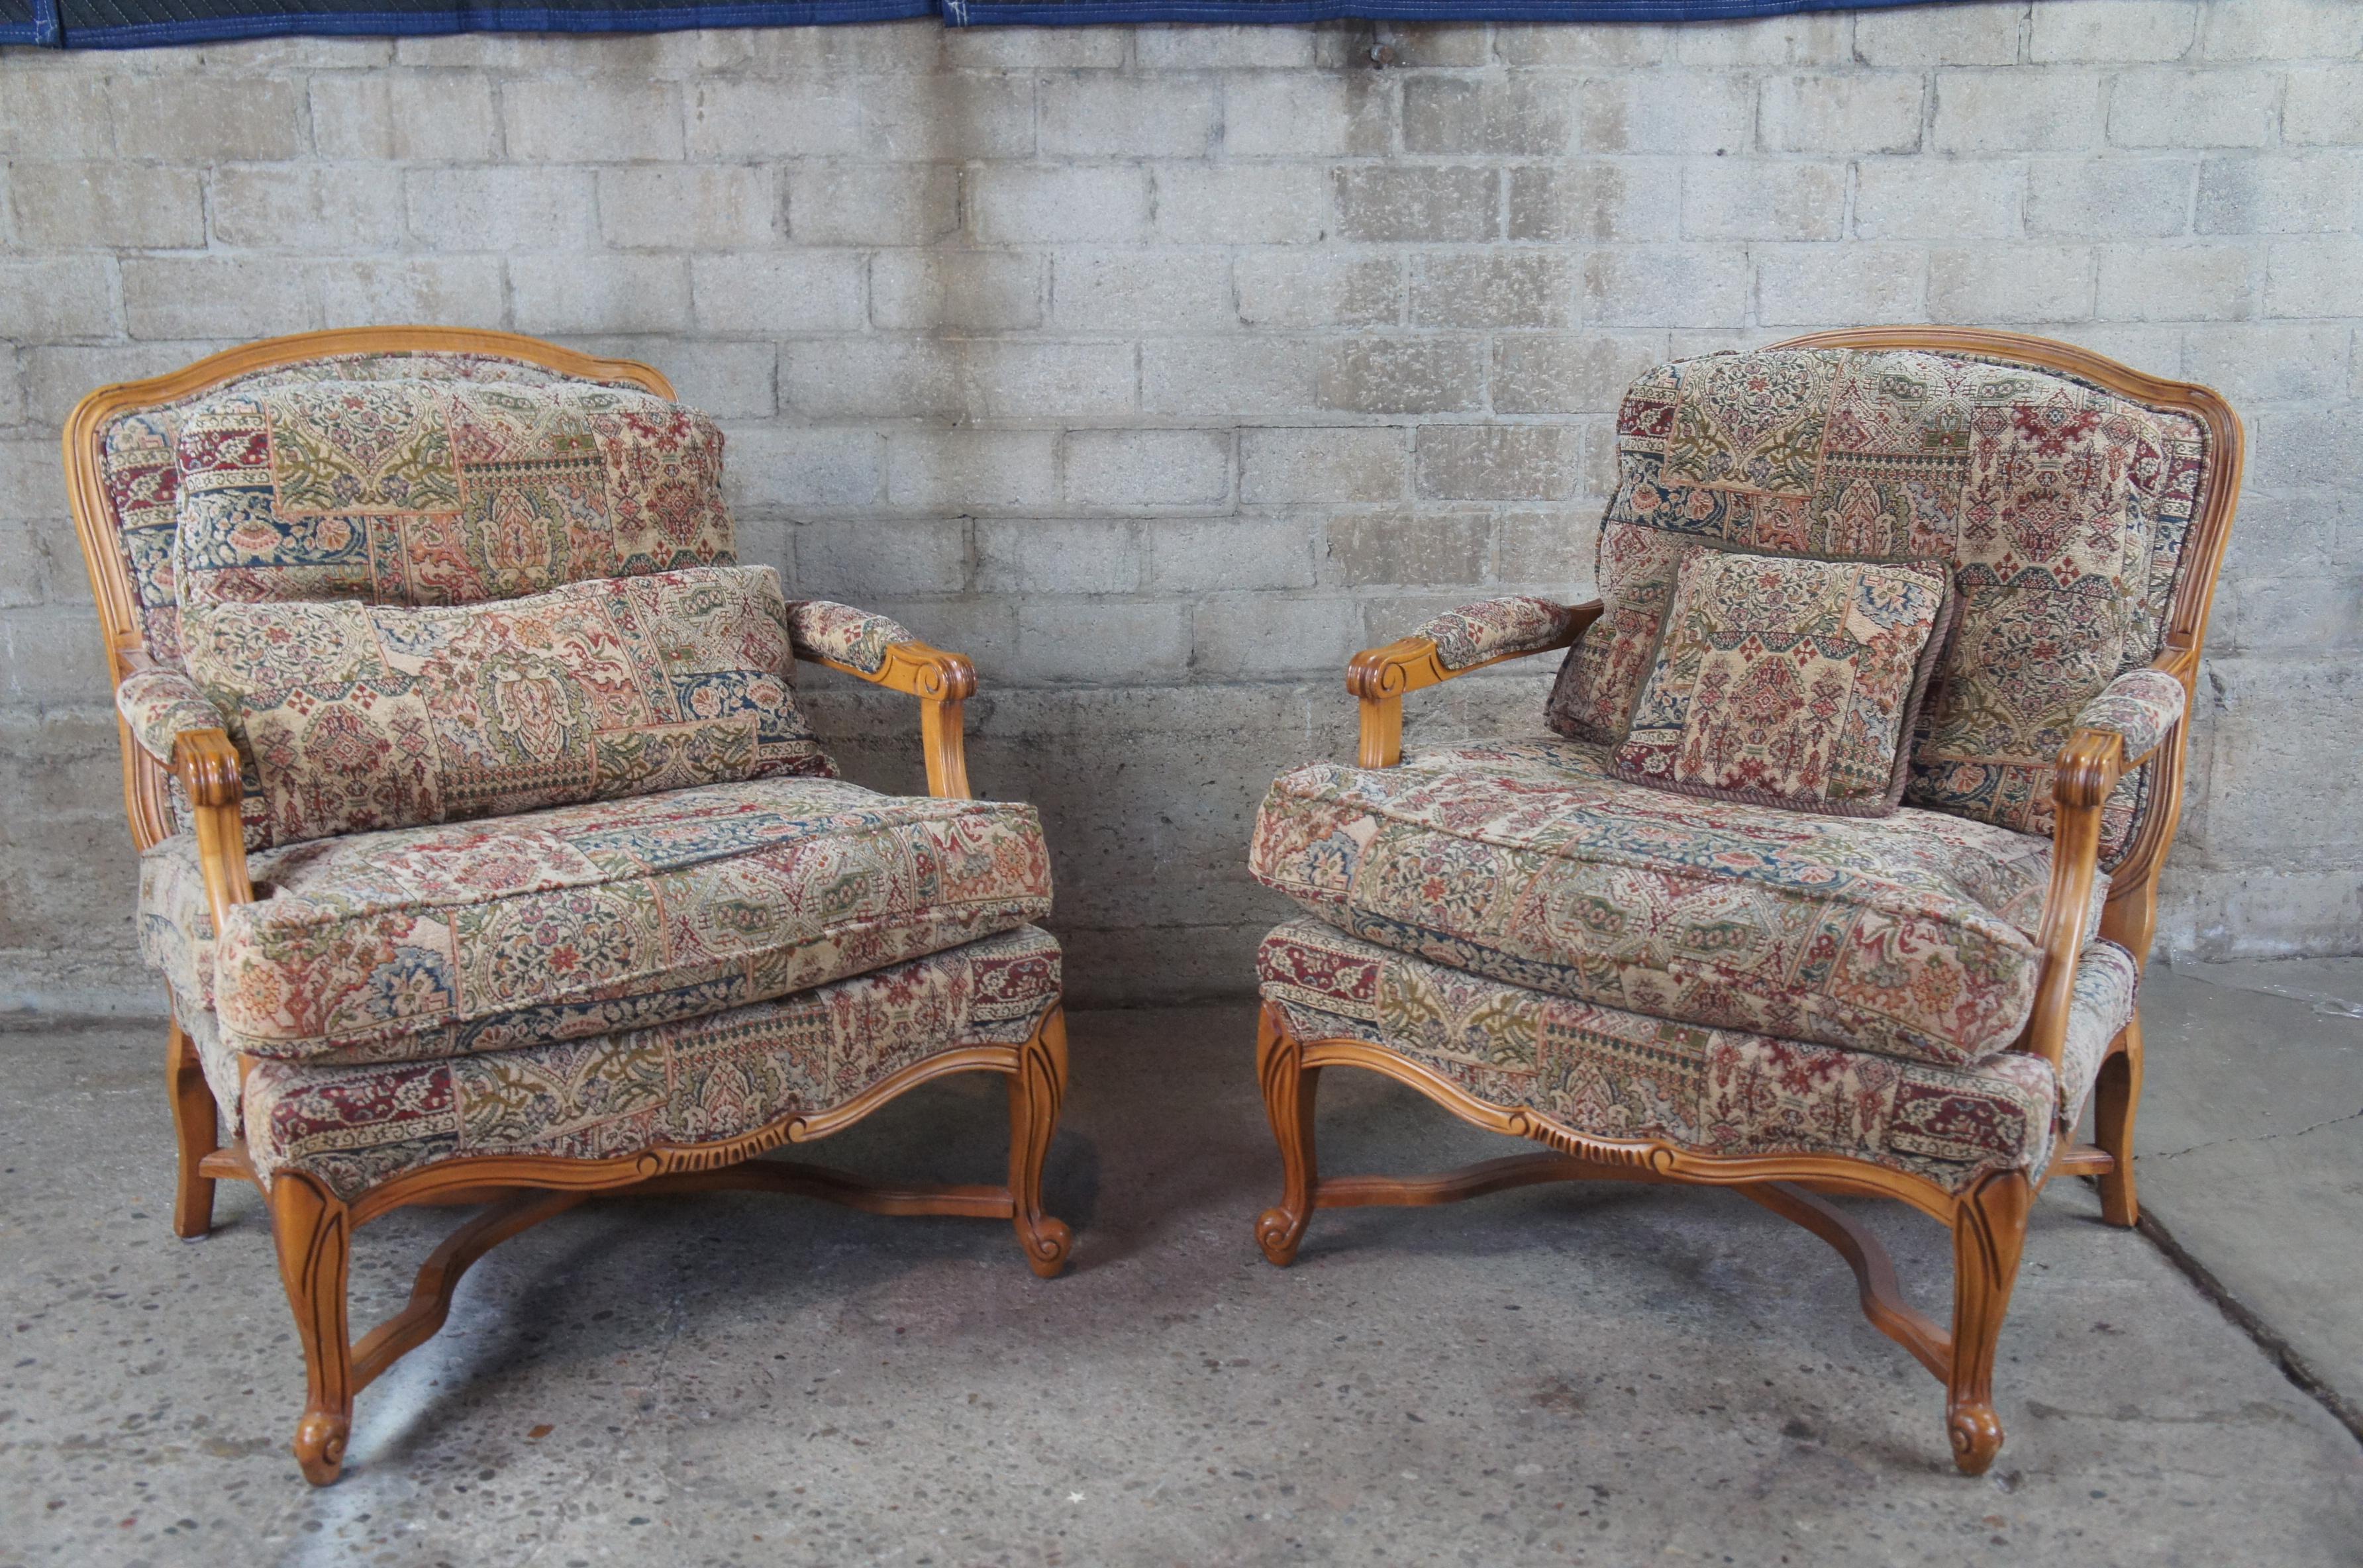 2 Vintage French Provincial Fauteuil Library Club Arm Accent Chairs & Ottoman 2